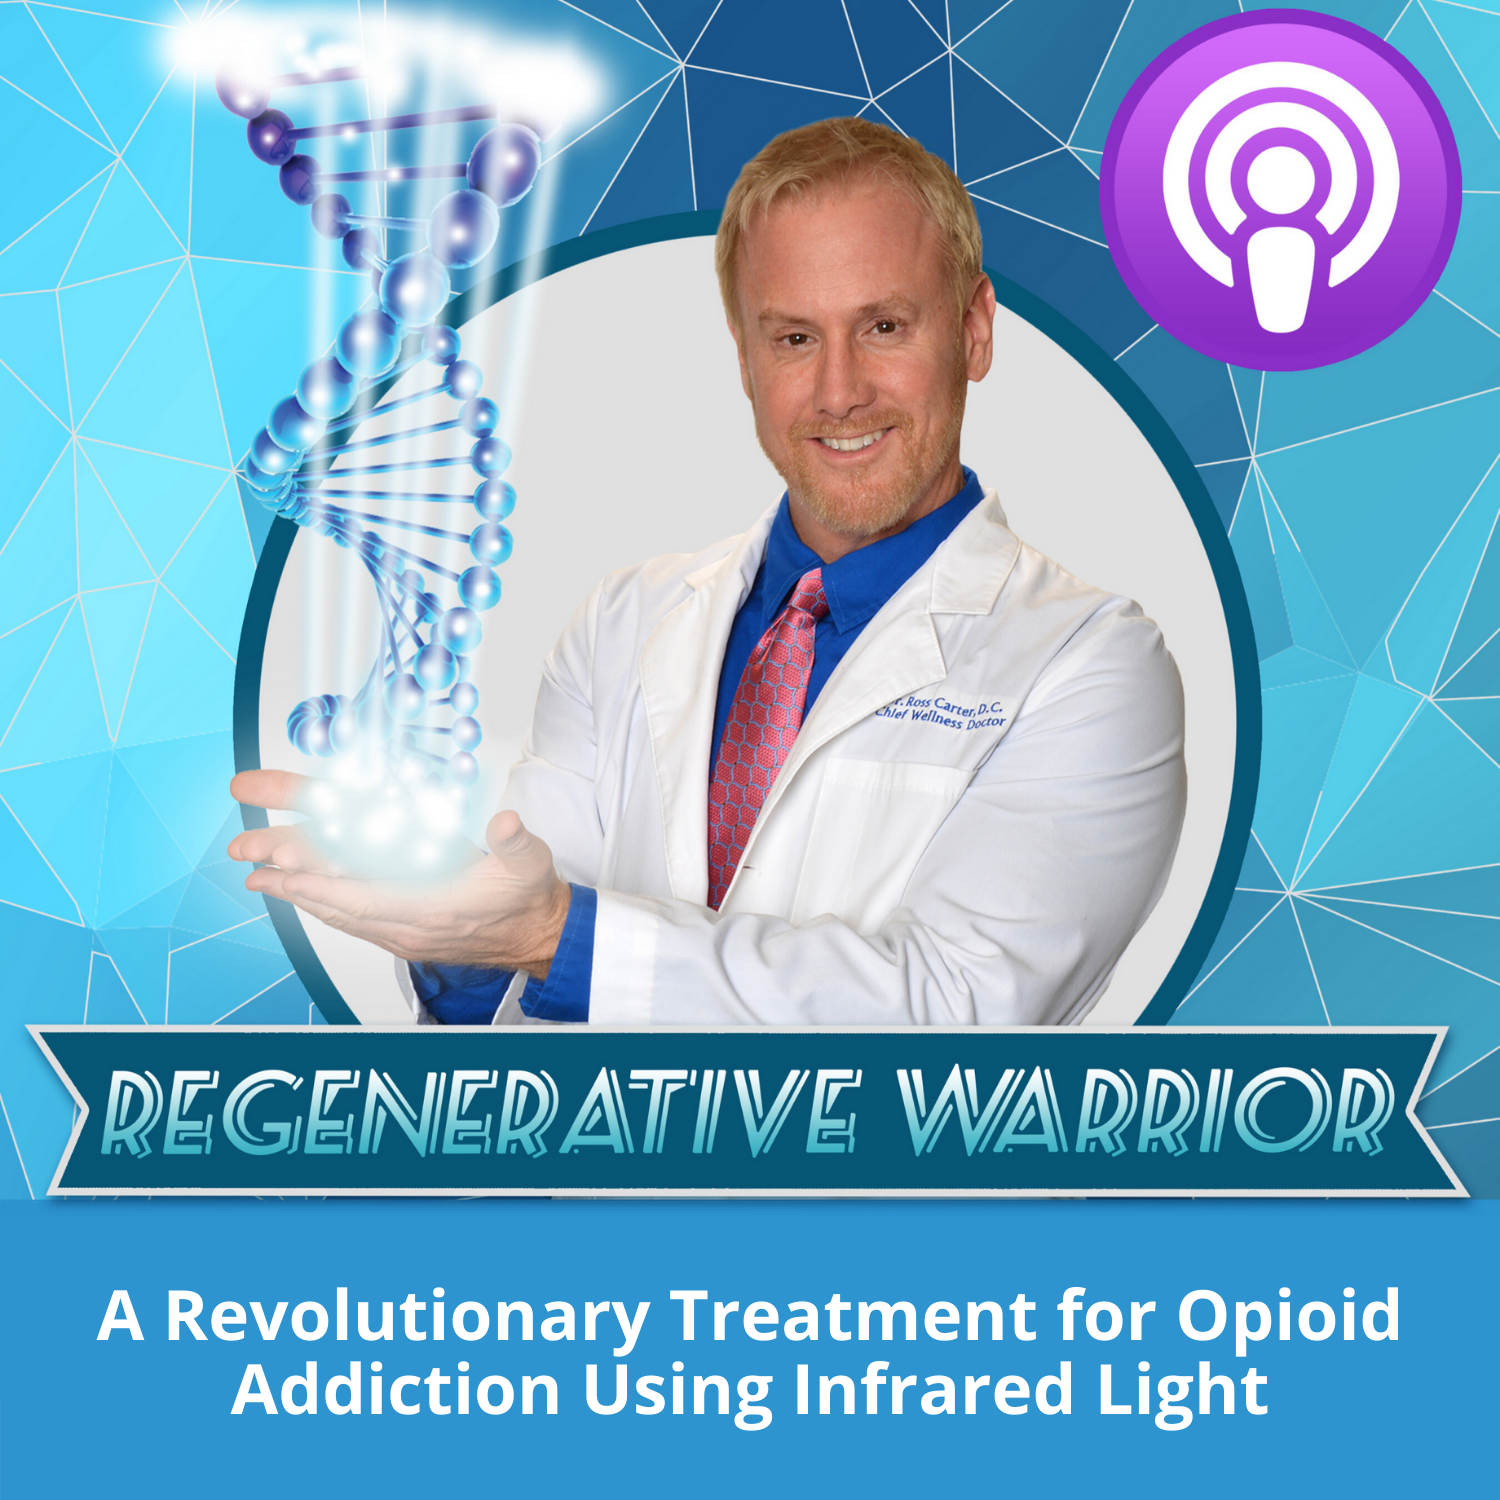 A Revolutionary Treatment for Opioid Addiction Using Infrared Light